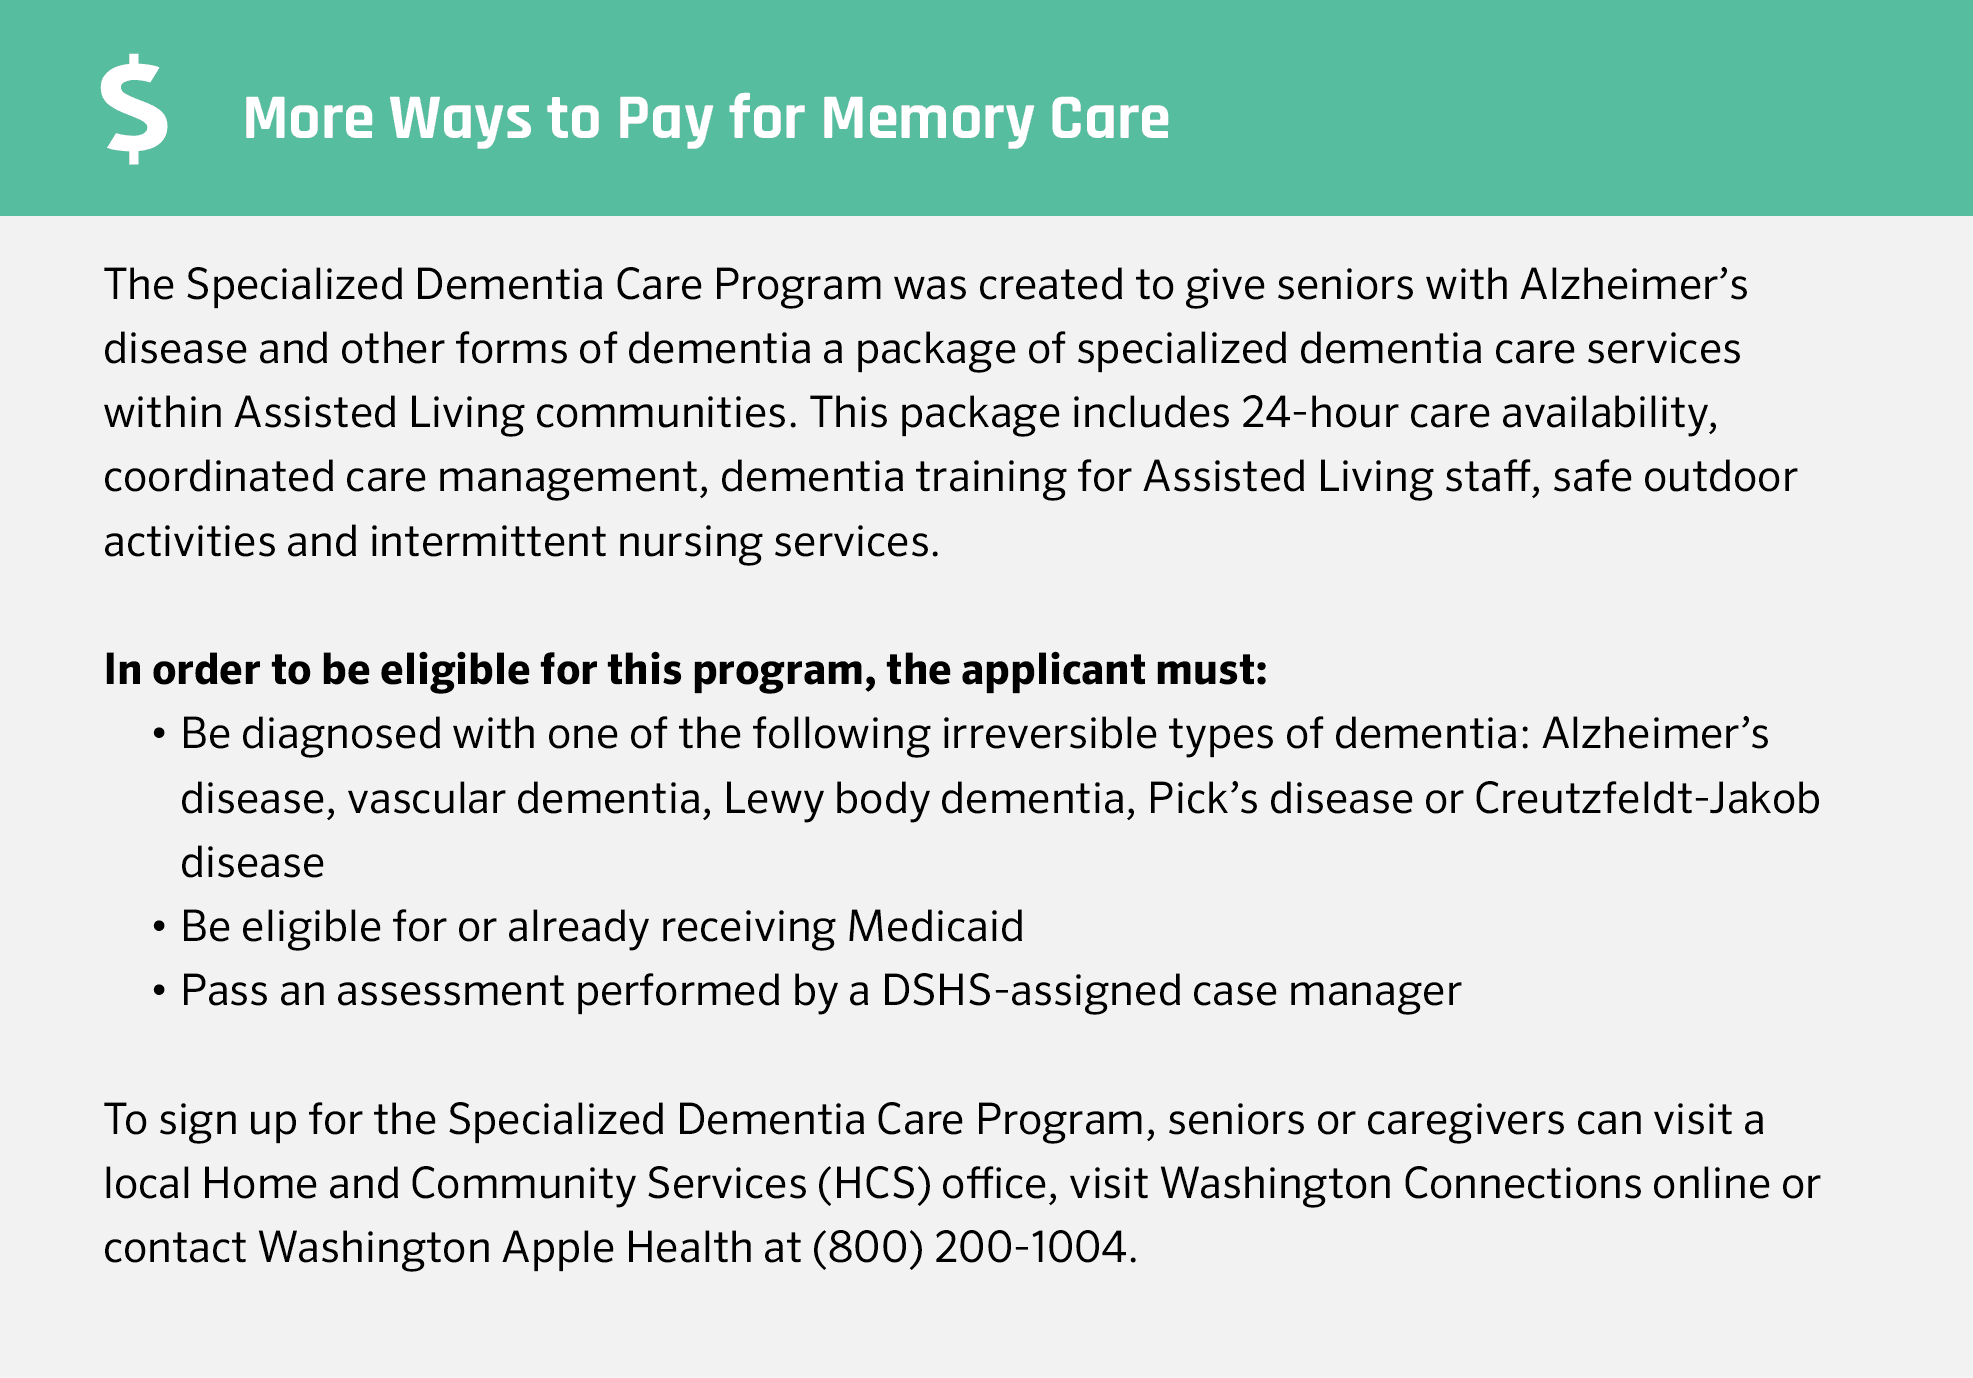 More ways to pay for memory care